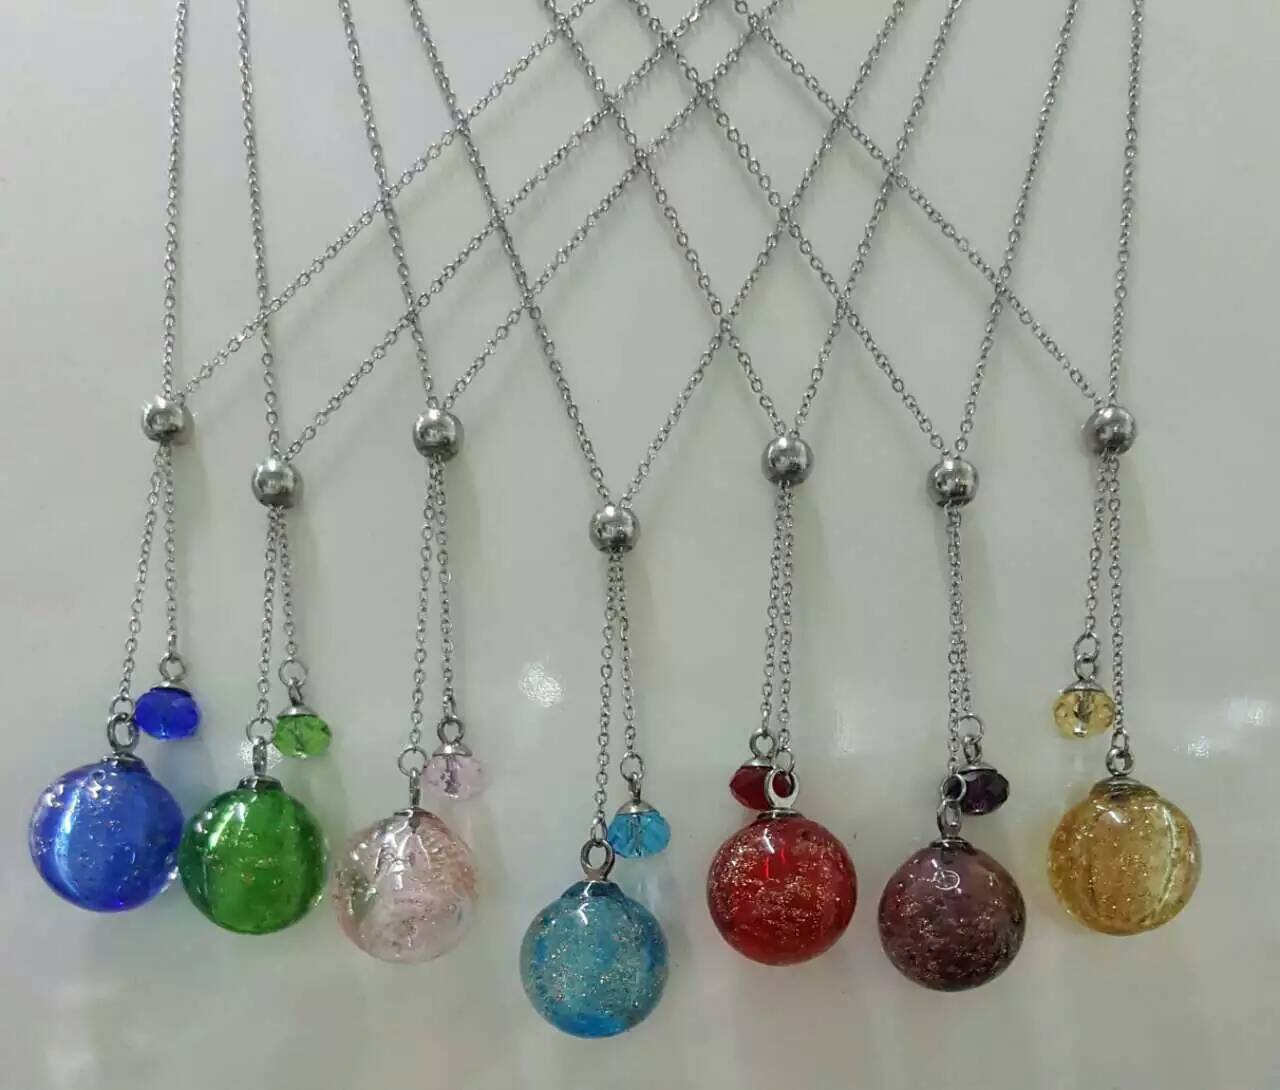 Wholesale new style fashional essential oil bottle diffuser necklace